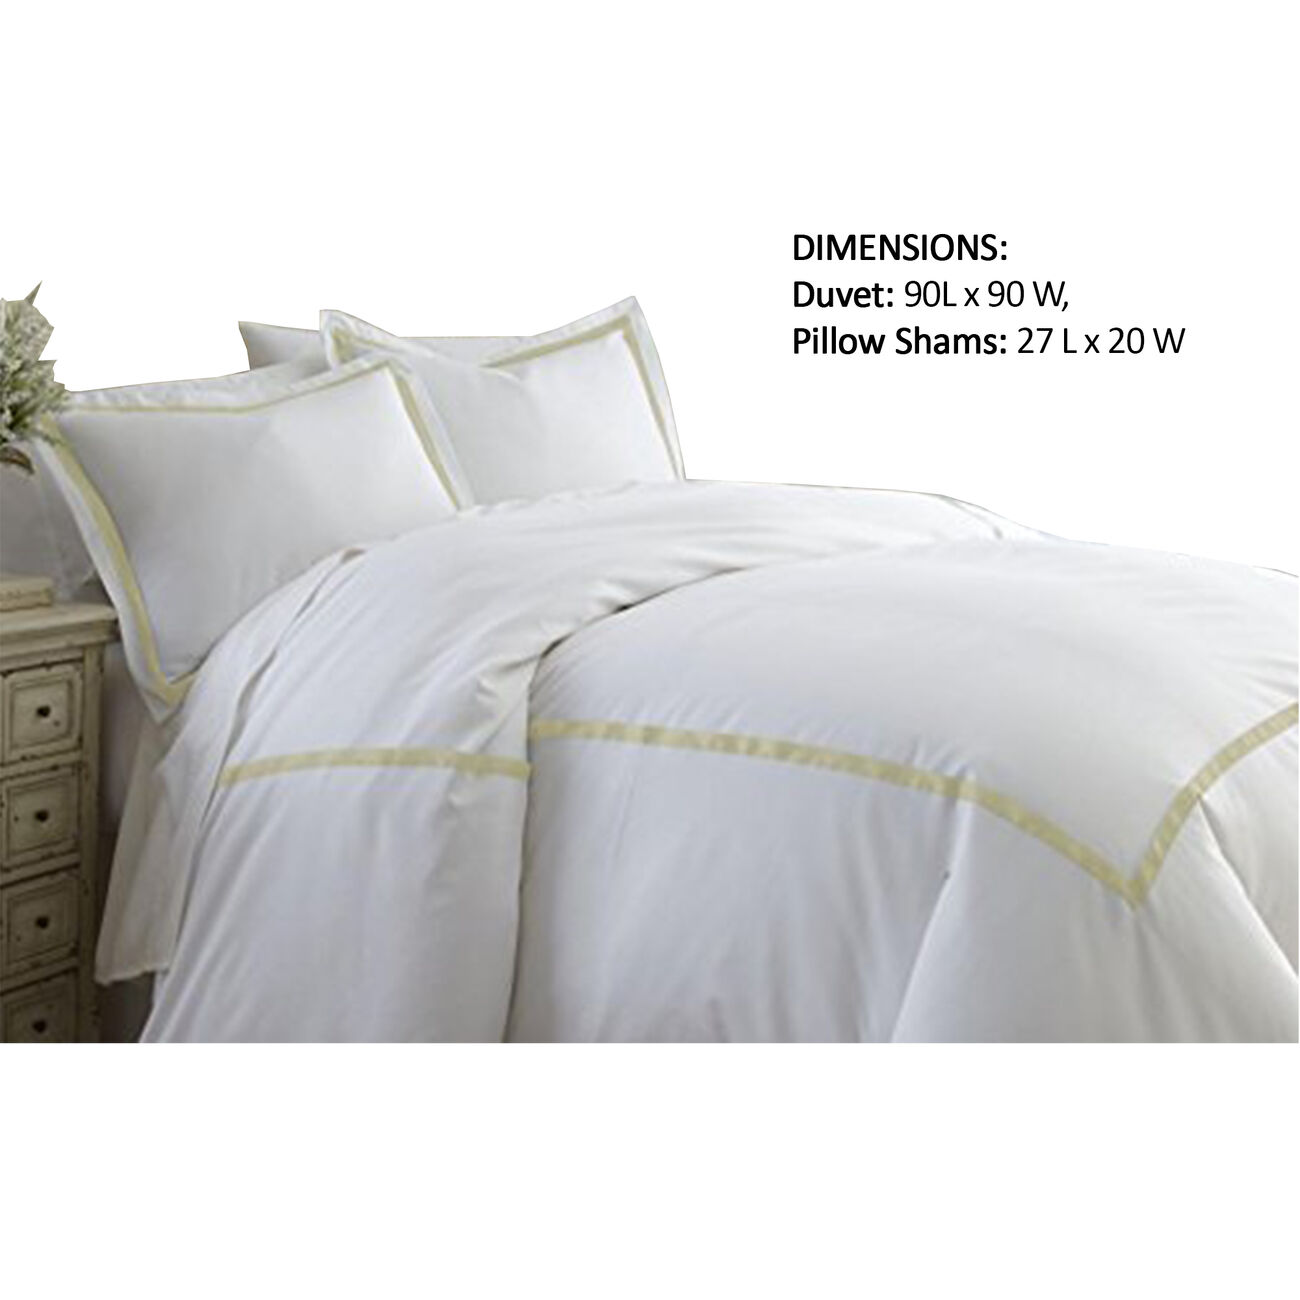 Larvik 3 Piece Cotton Queen Duvet Set with Satin Band The Urban Port, White and Beige